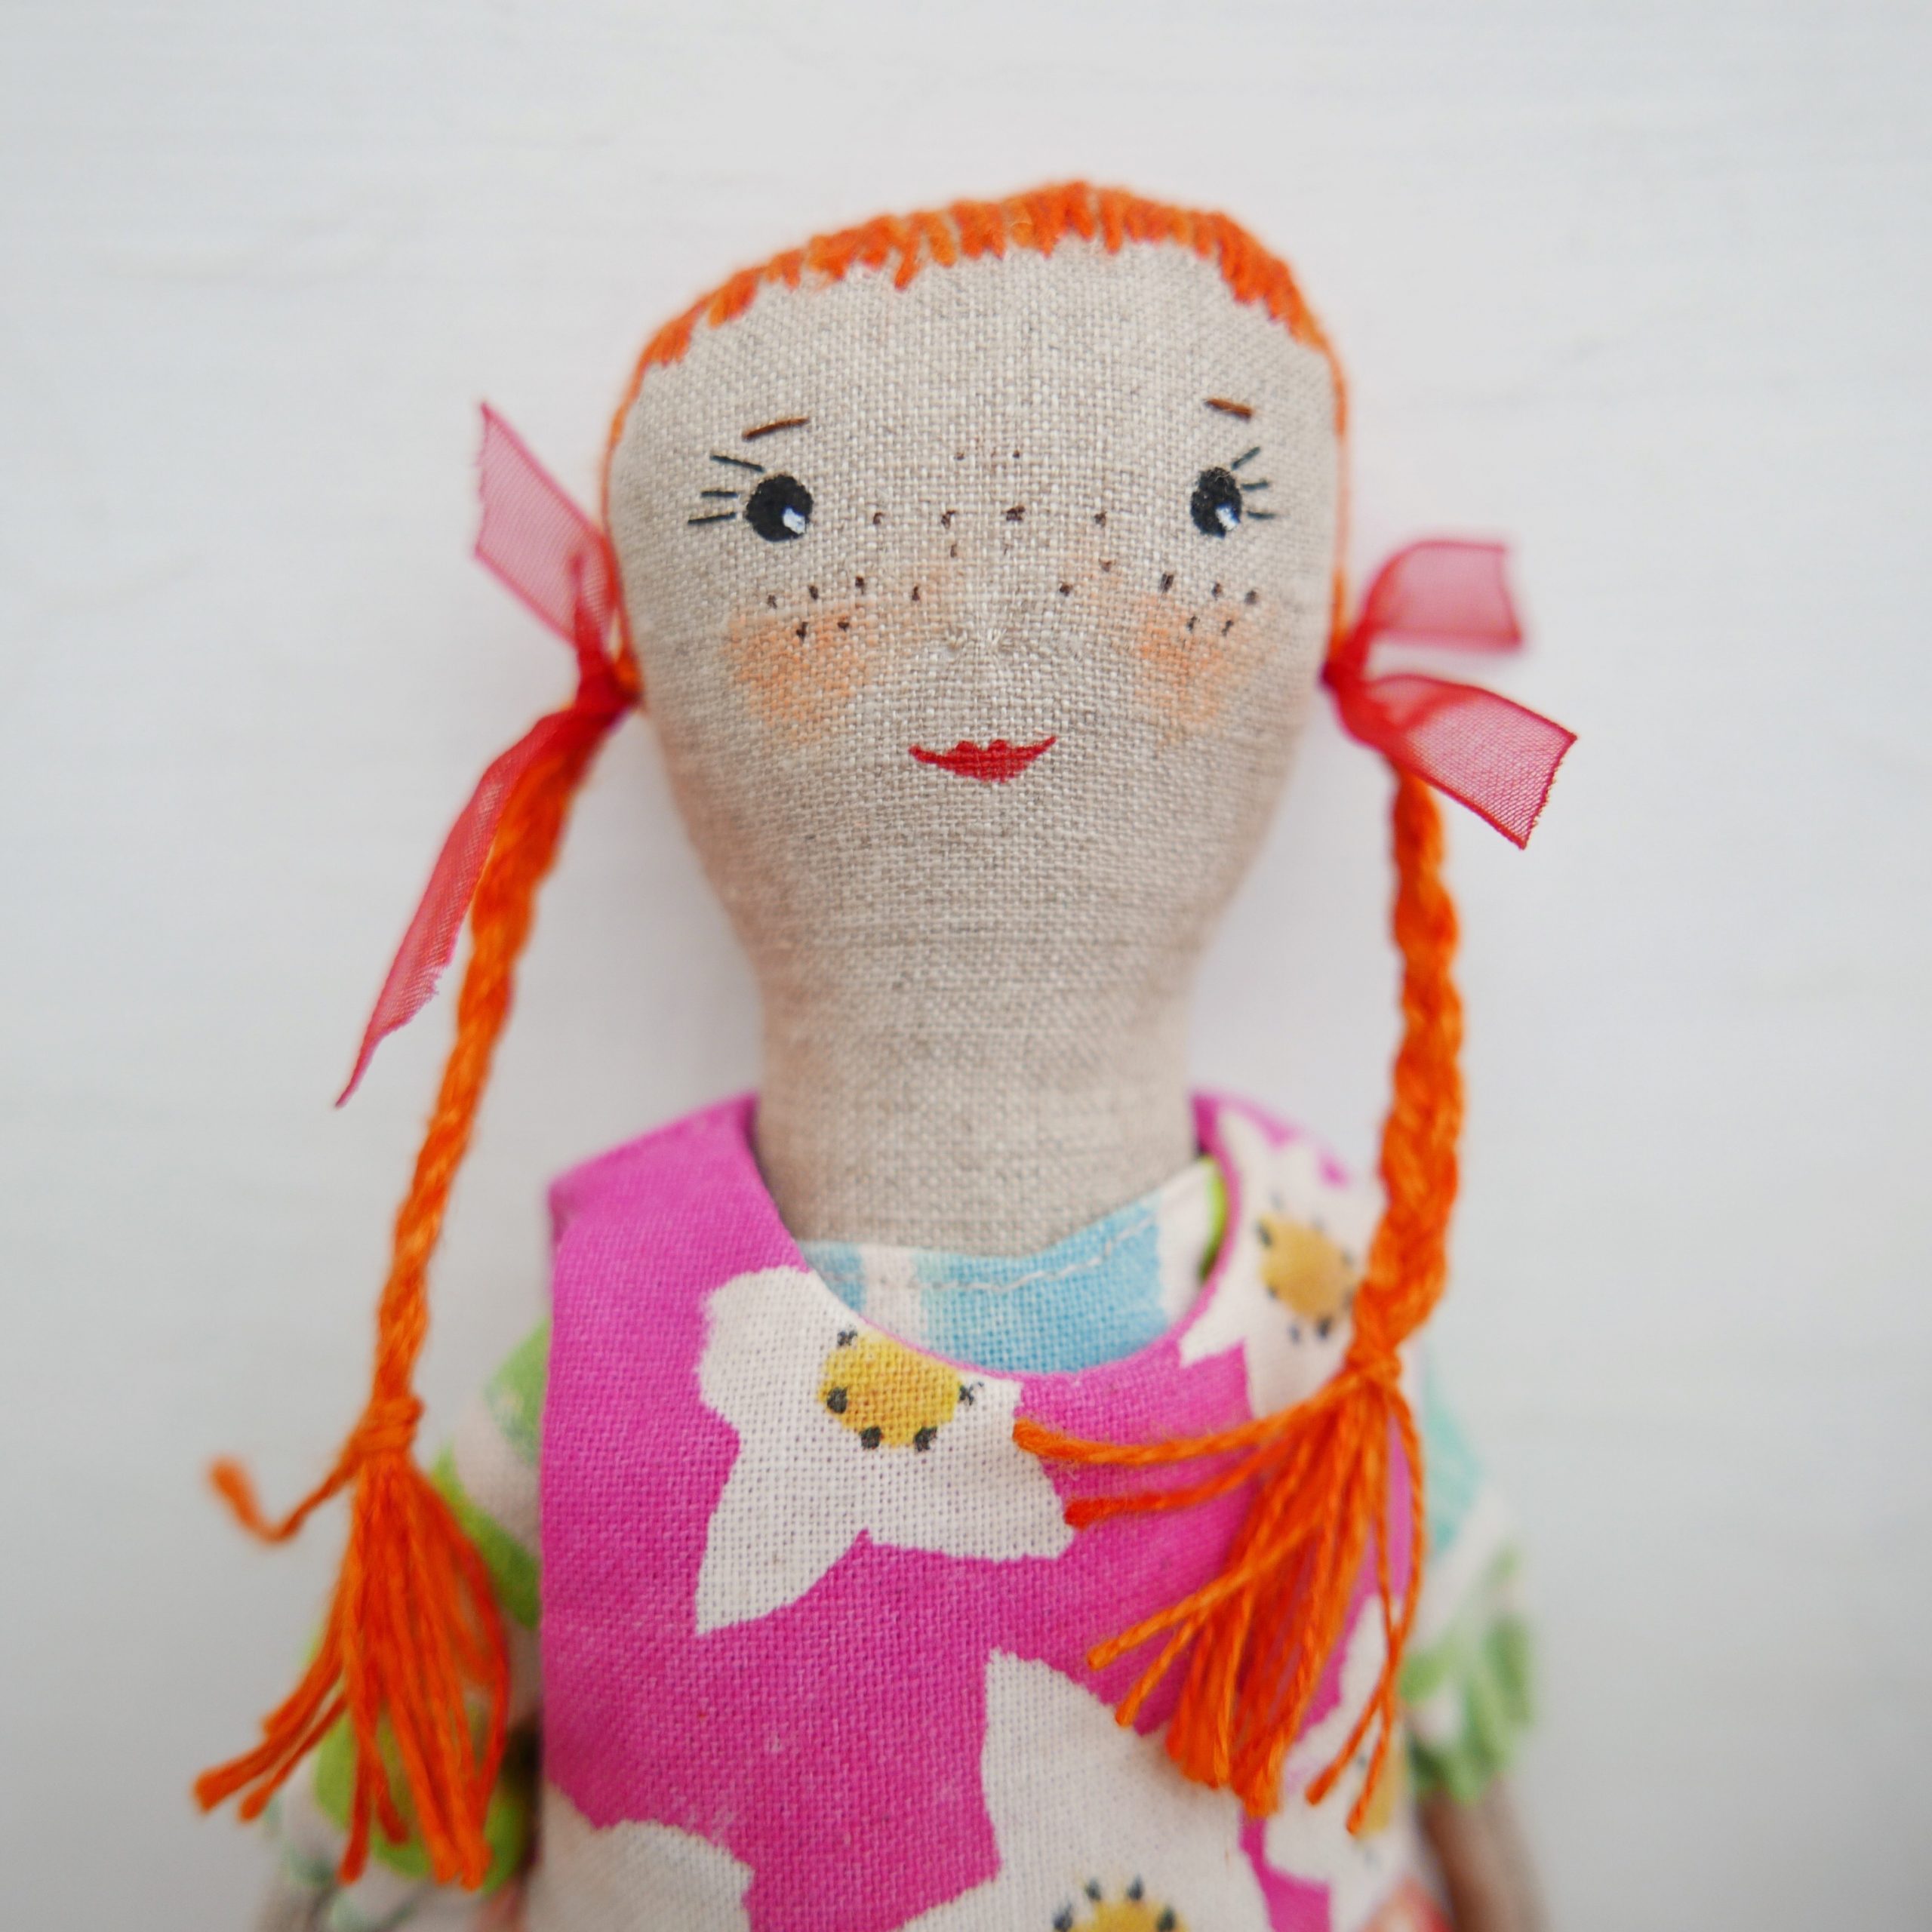 Handmade colourful red head doll with plaits by modflowers british maker